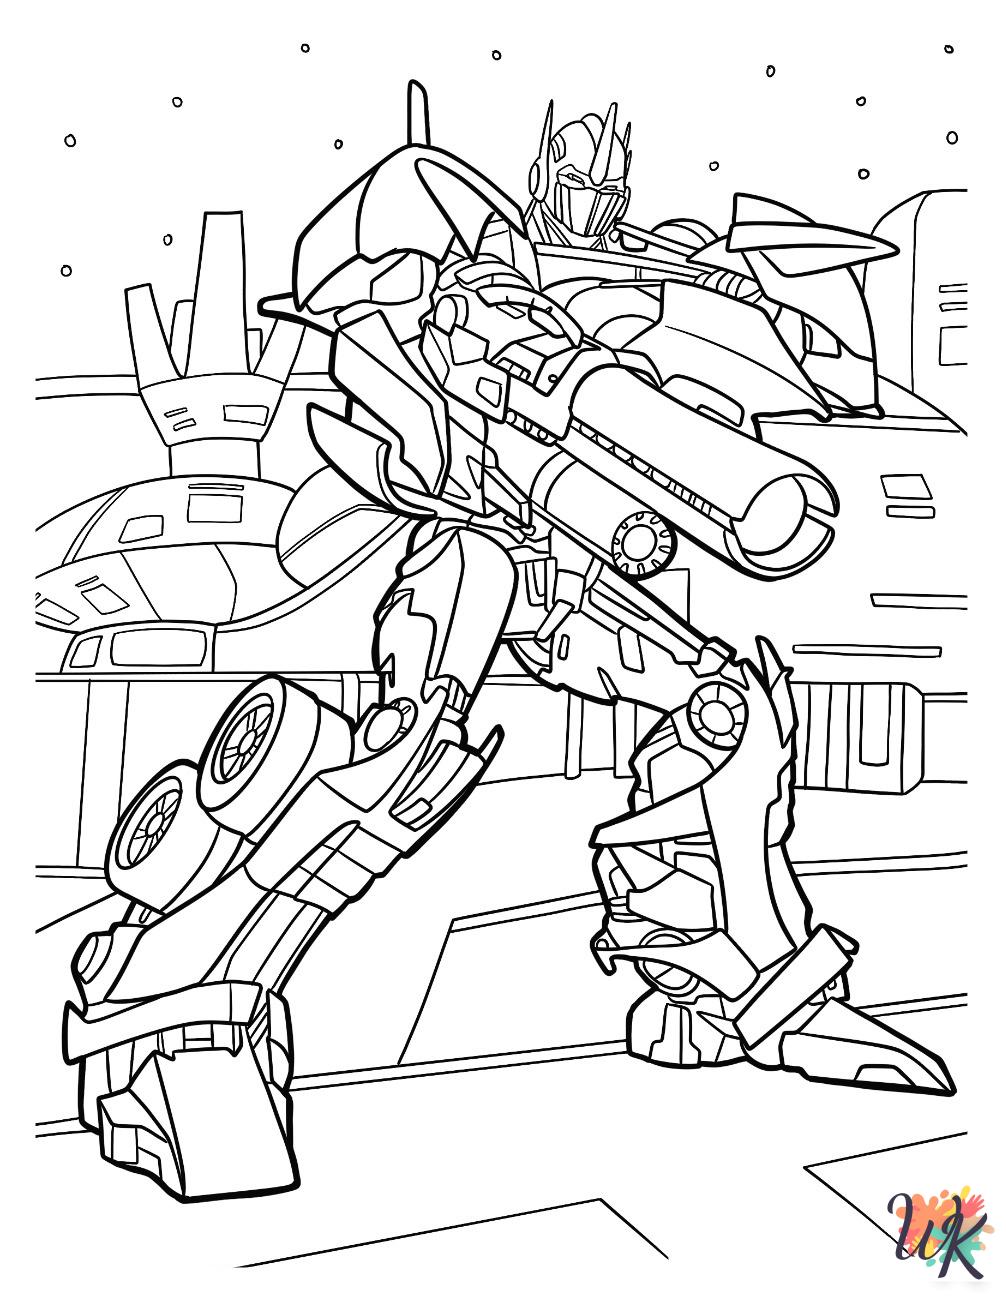 Optimus Prime coloring pages free printable